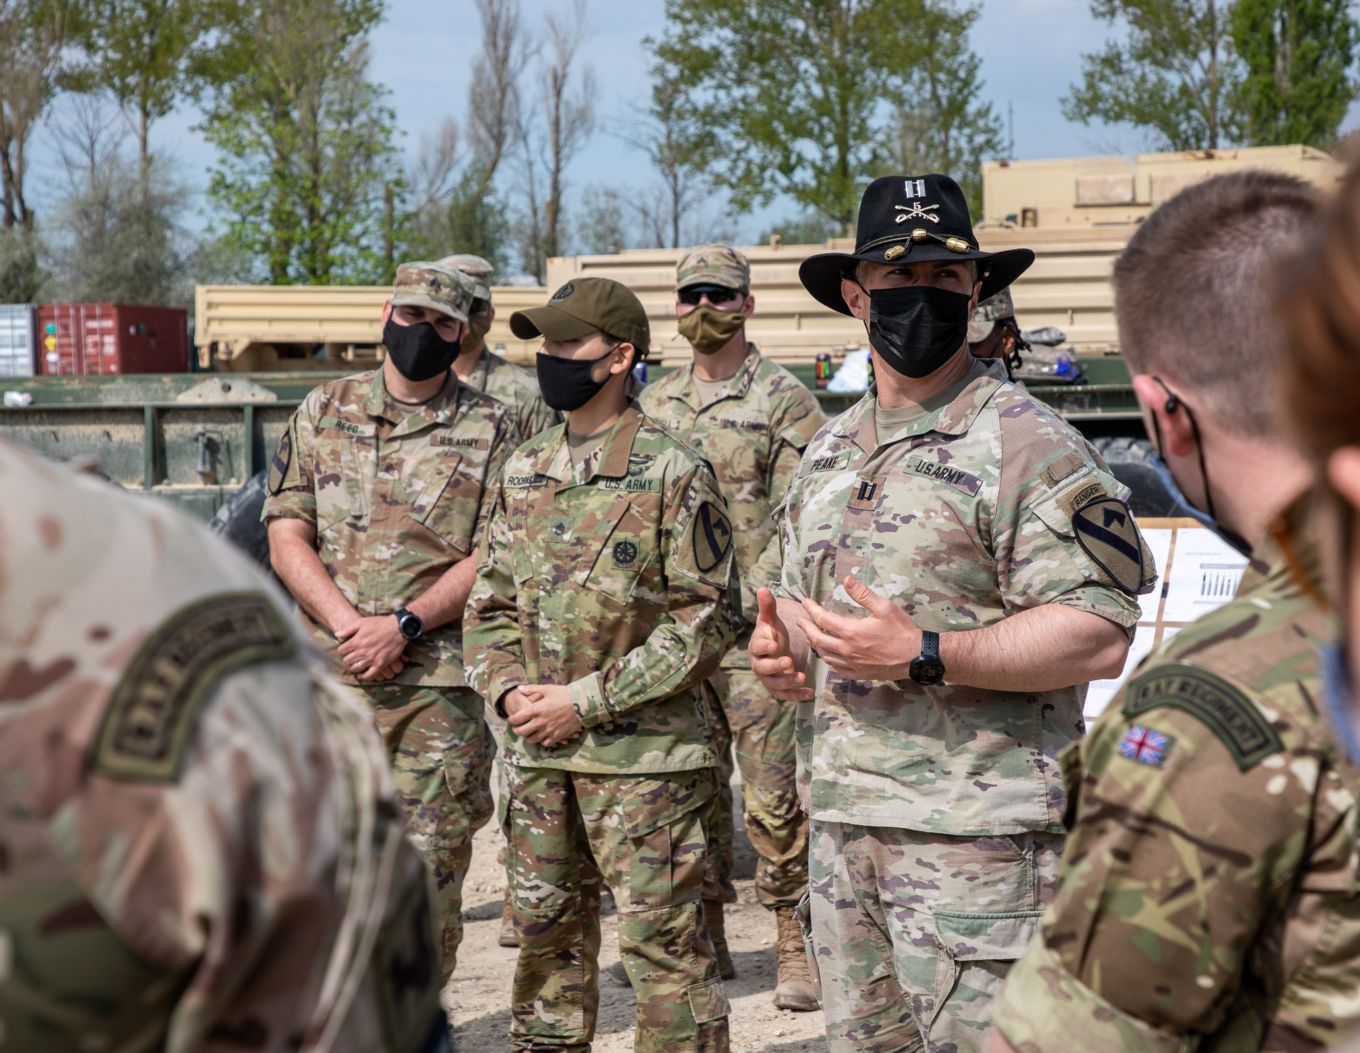 The Gunners and the US cavalrymen shared tactics and discussed weapon systems and common battlefield procedures.